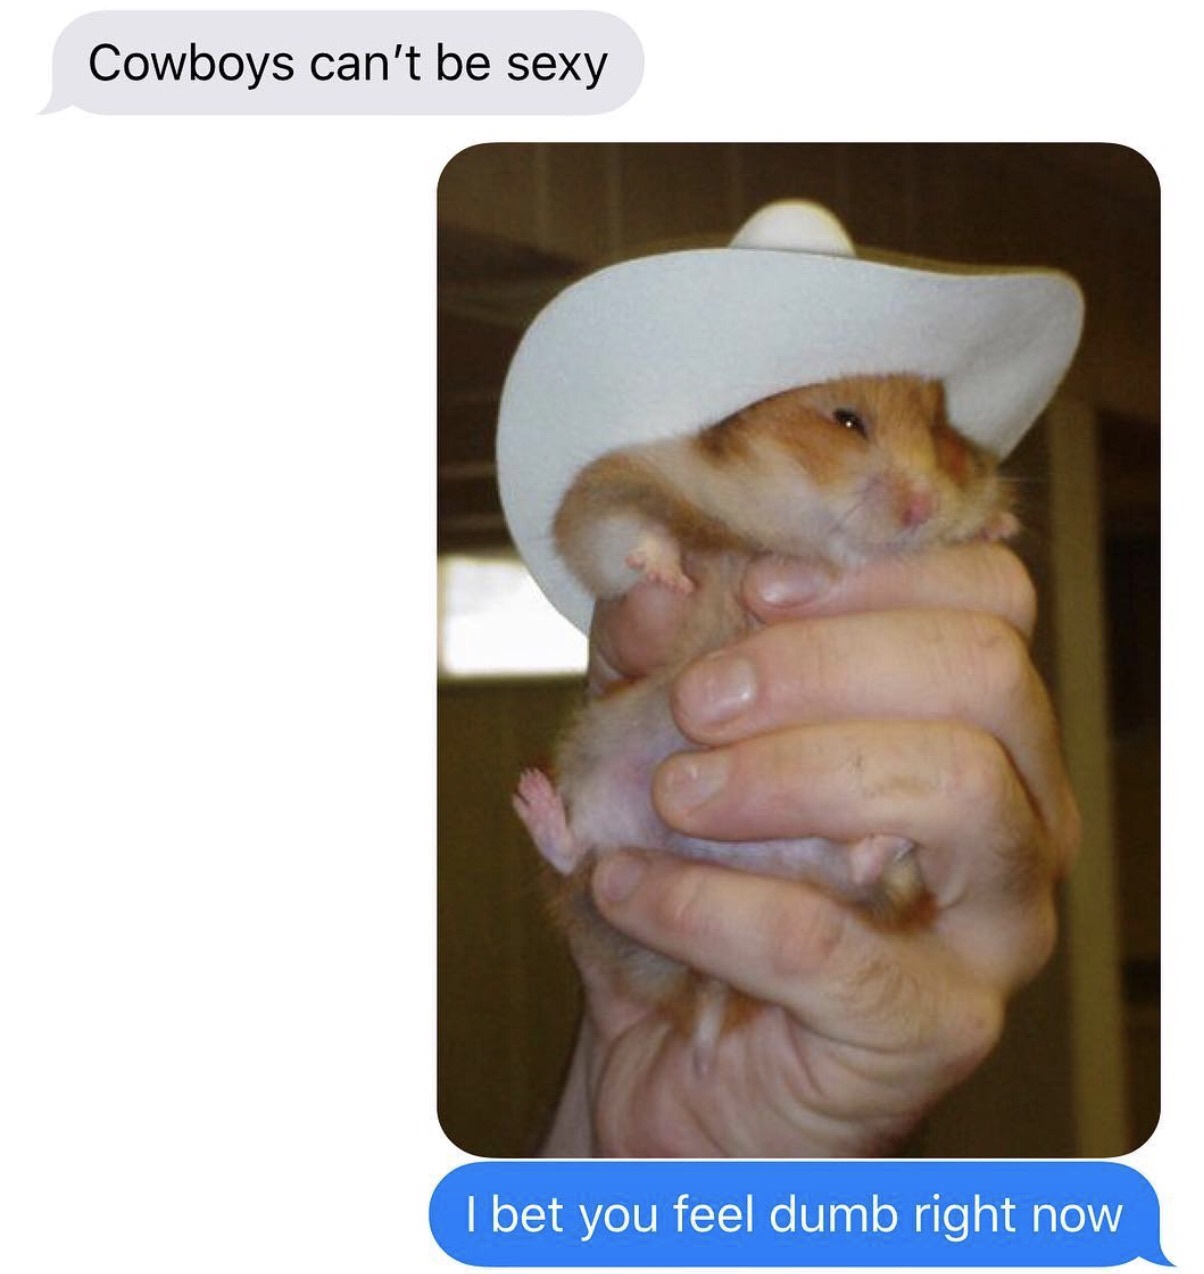 meme just gonna scroll by without saying howdy - Cowboys can't be sexy I bet you feel dumb right now